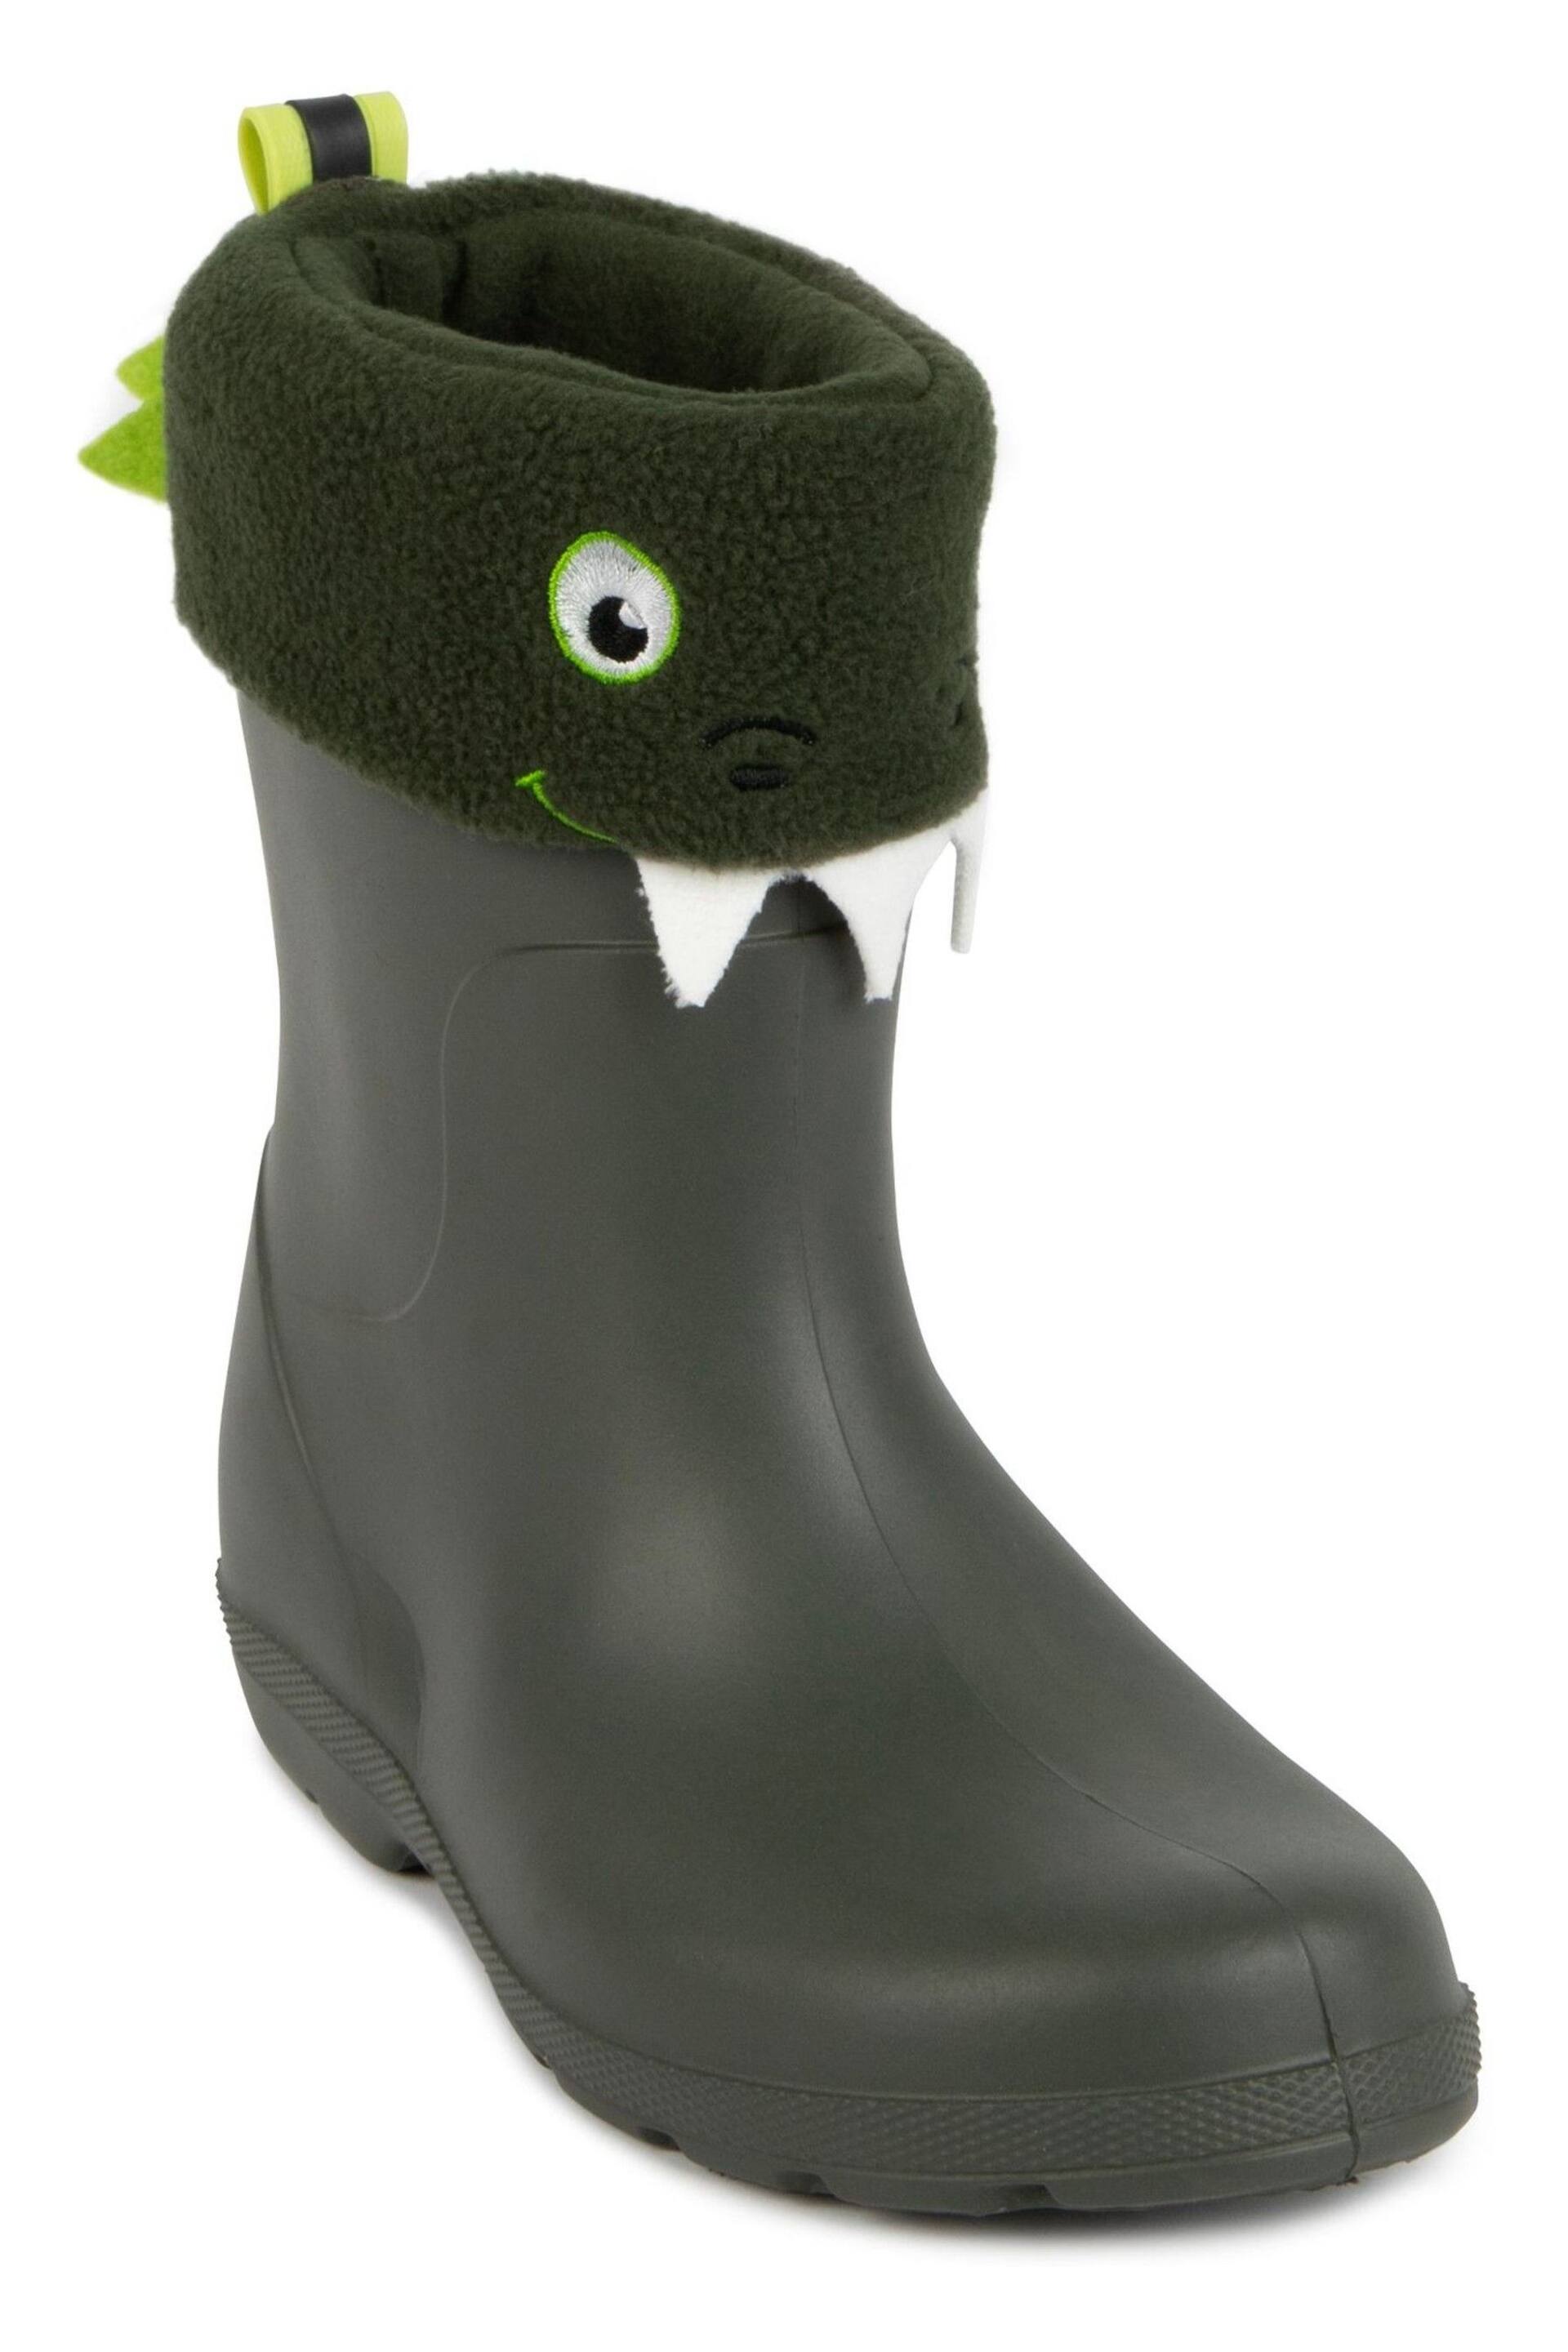 Totes Green Childrens Dinosaur Welly Liner Socks - Image 5 of 5